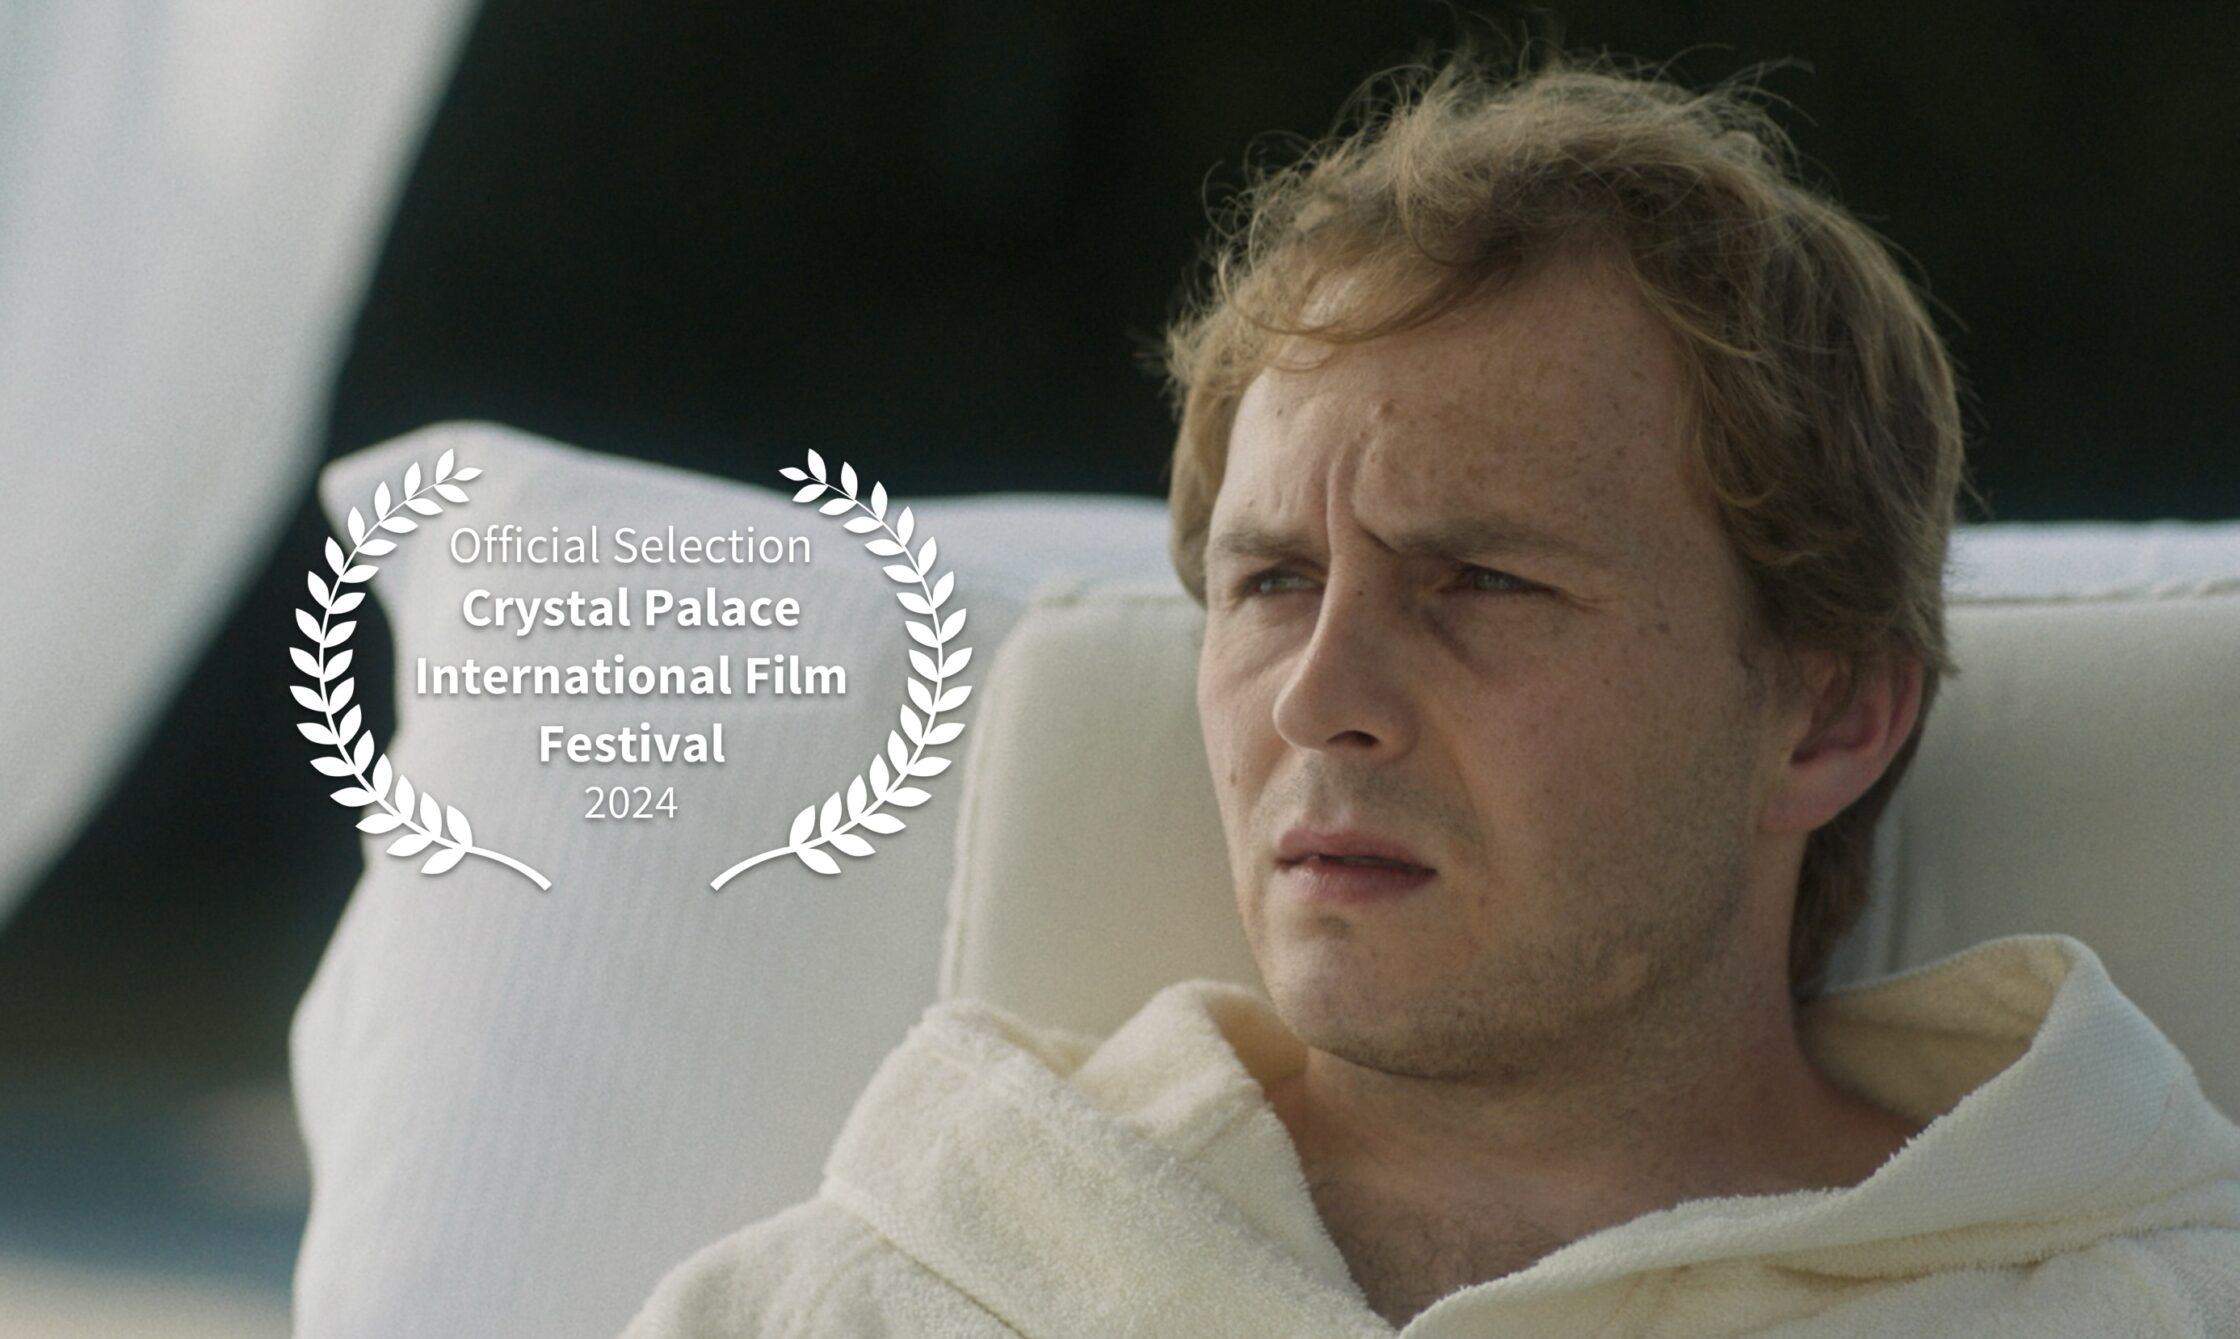 “Lo Sguardo” selected for “Crystal Palace International Film Festival 2024”